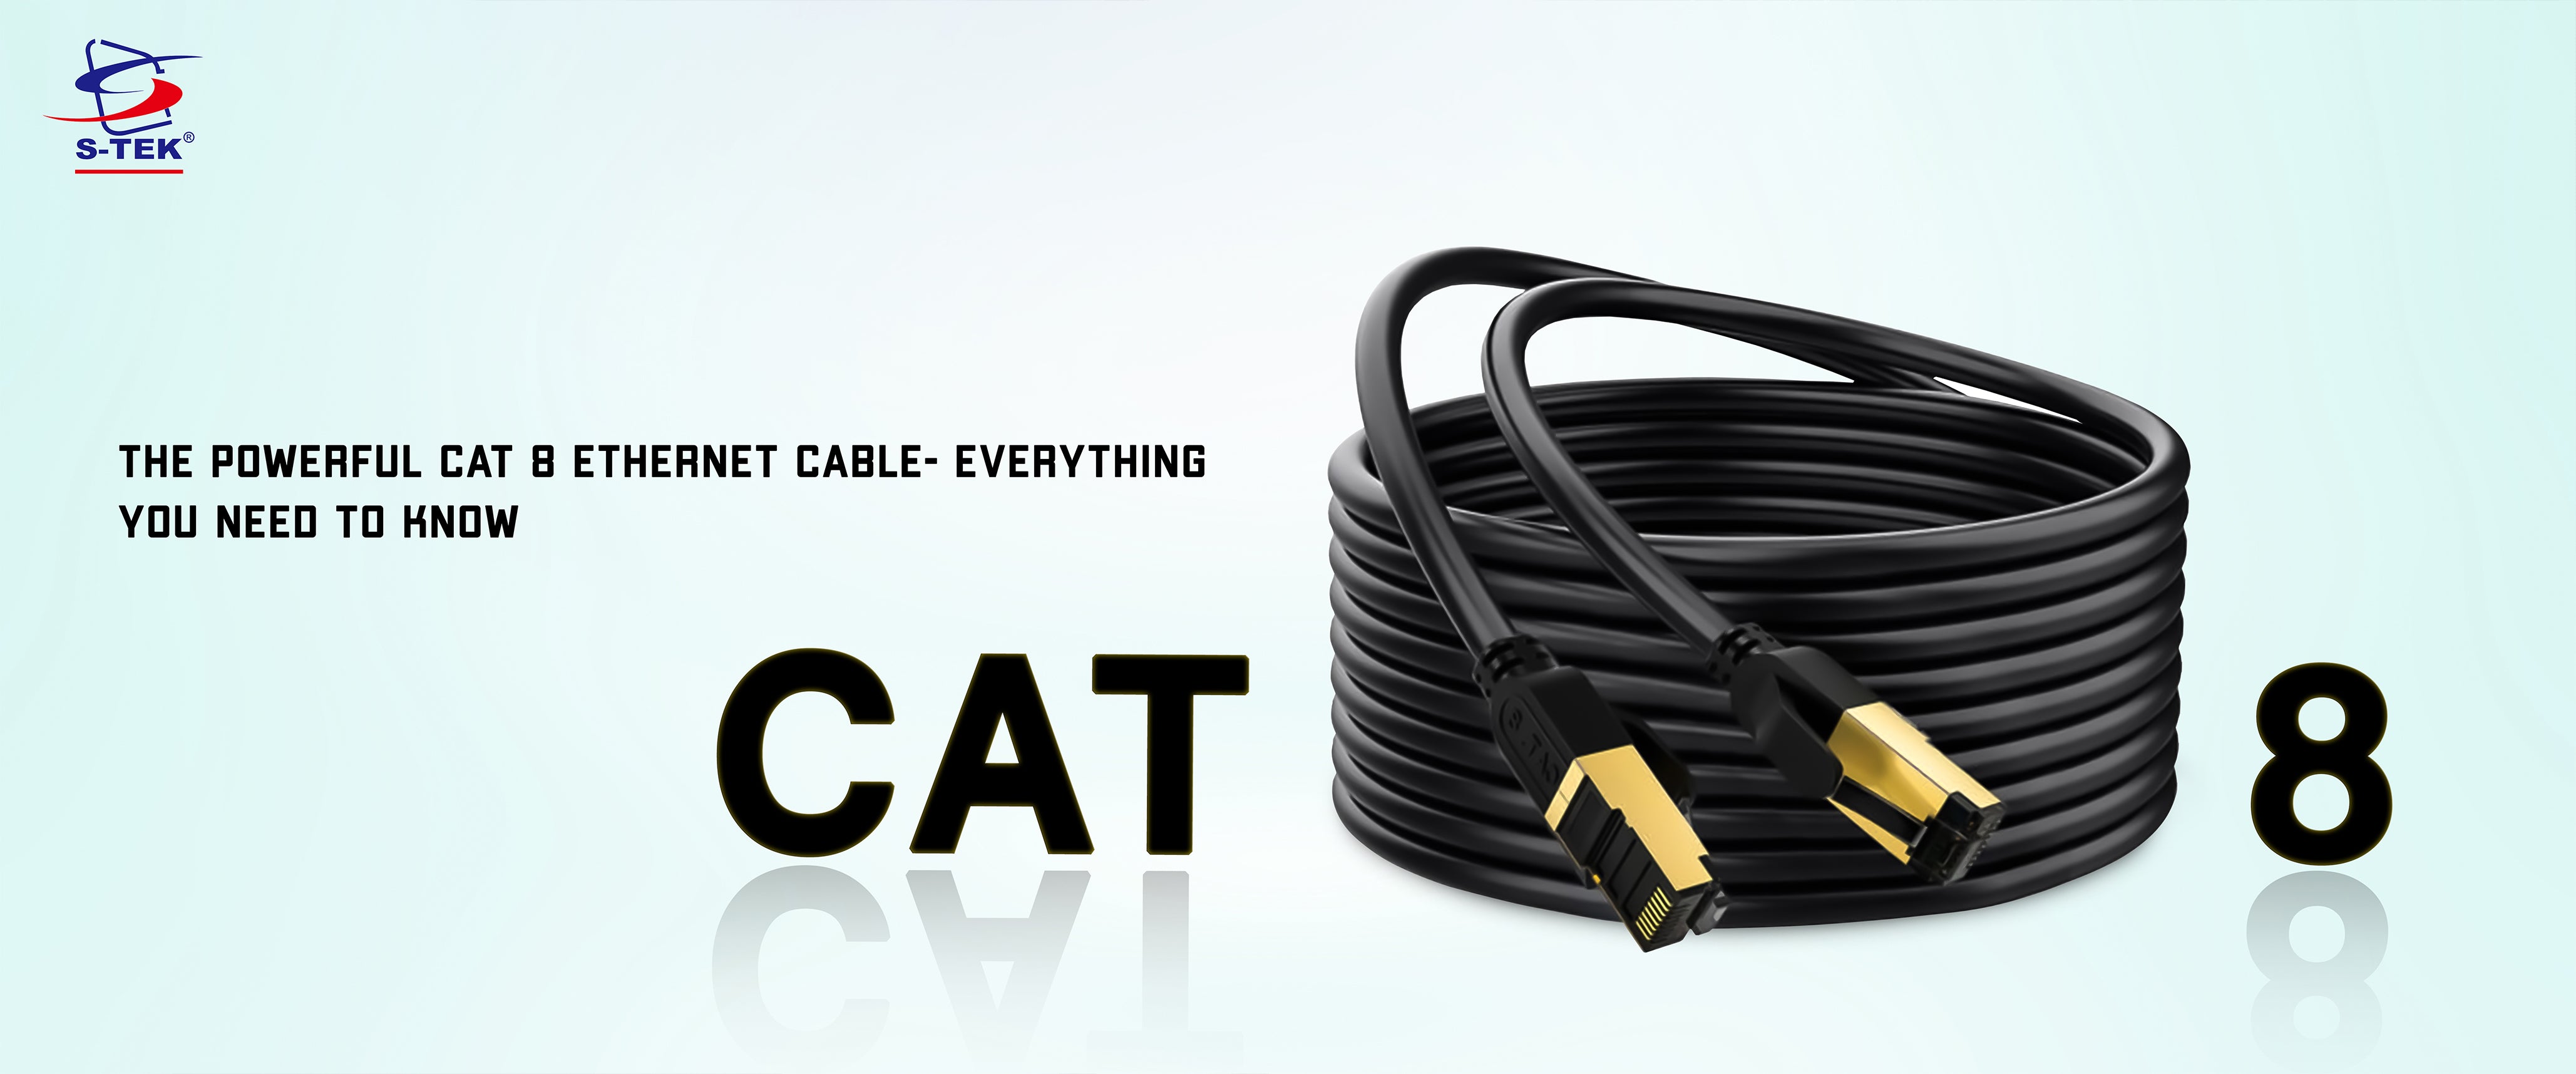 The Powerful Cat 8 Ethernet Cable- Everything You Need to Know